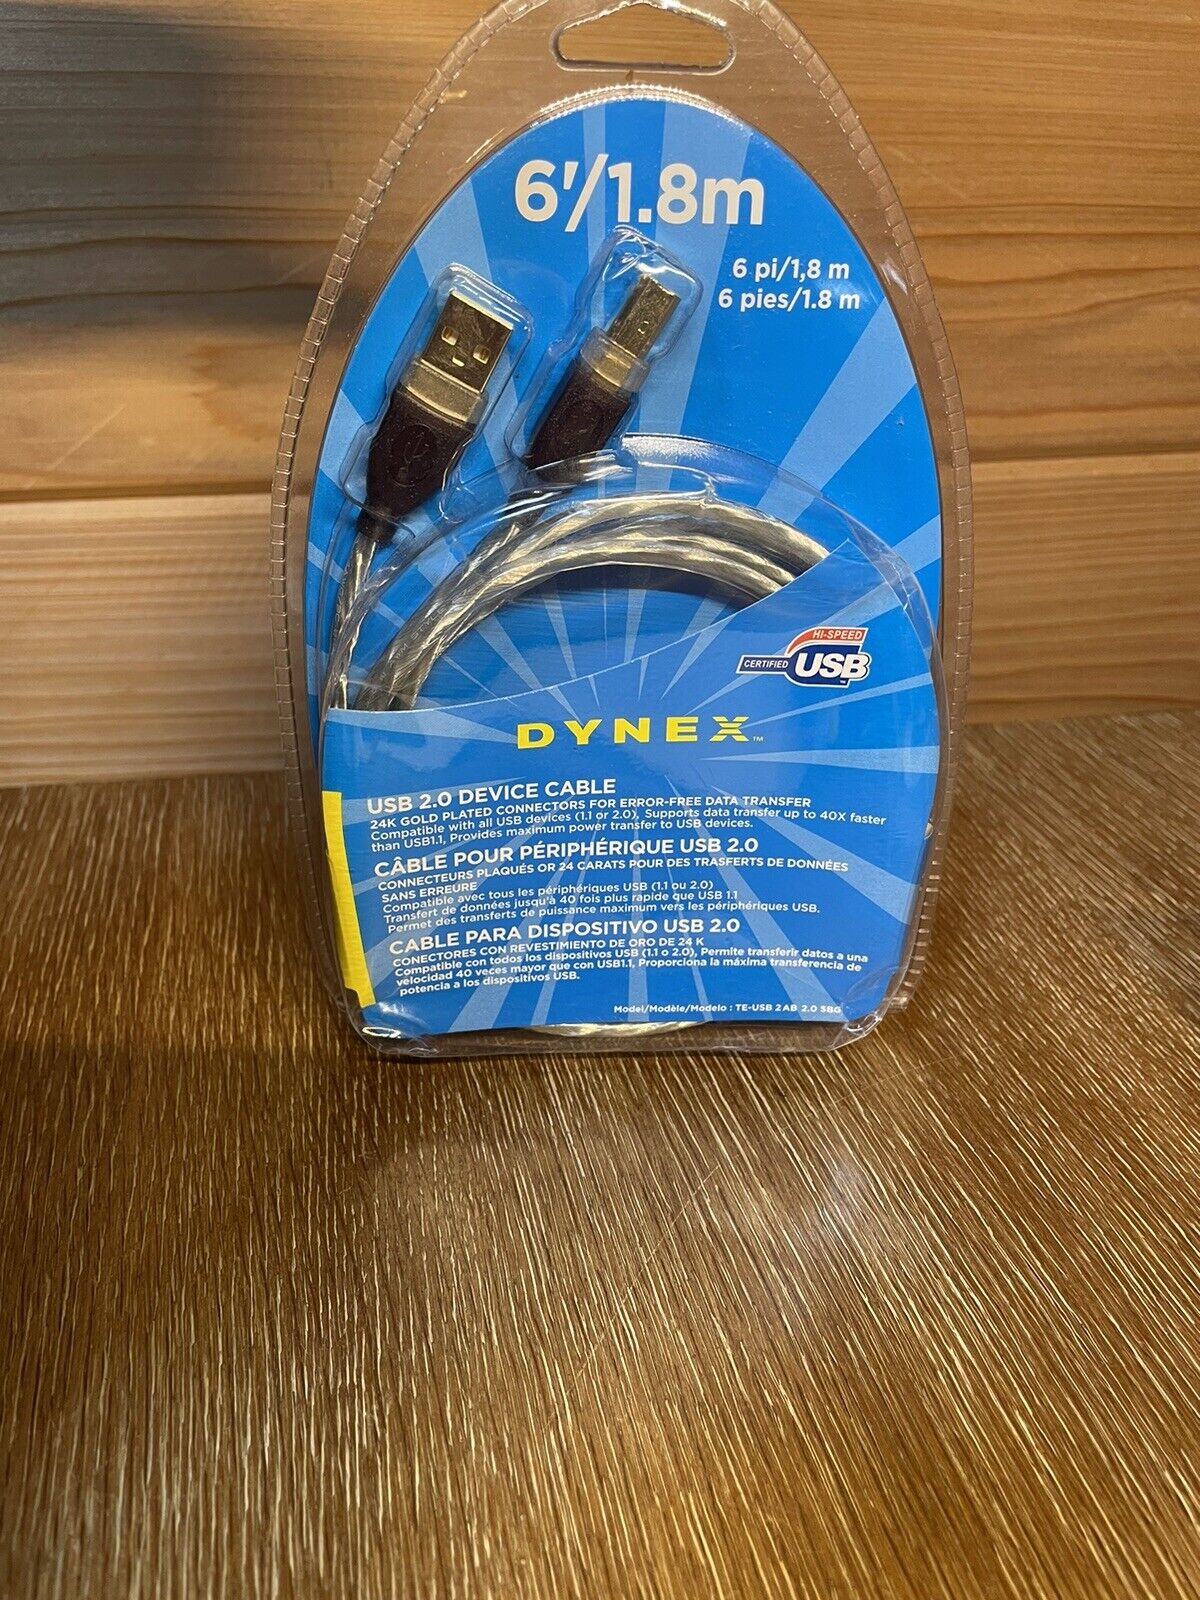 *NEW* DYNEX 6'/1.8M USB 2.0 DEVICE CABLE